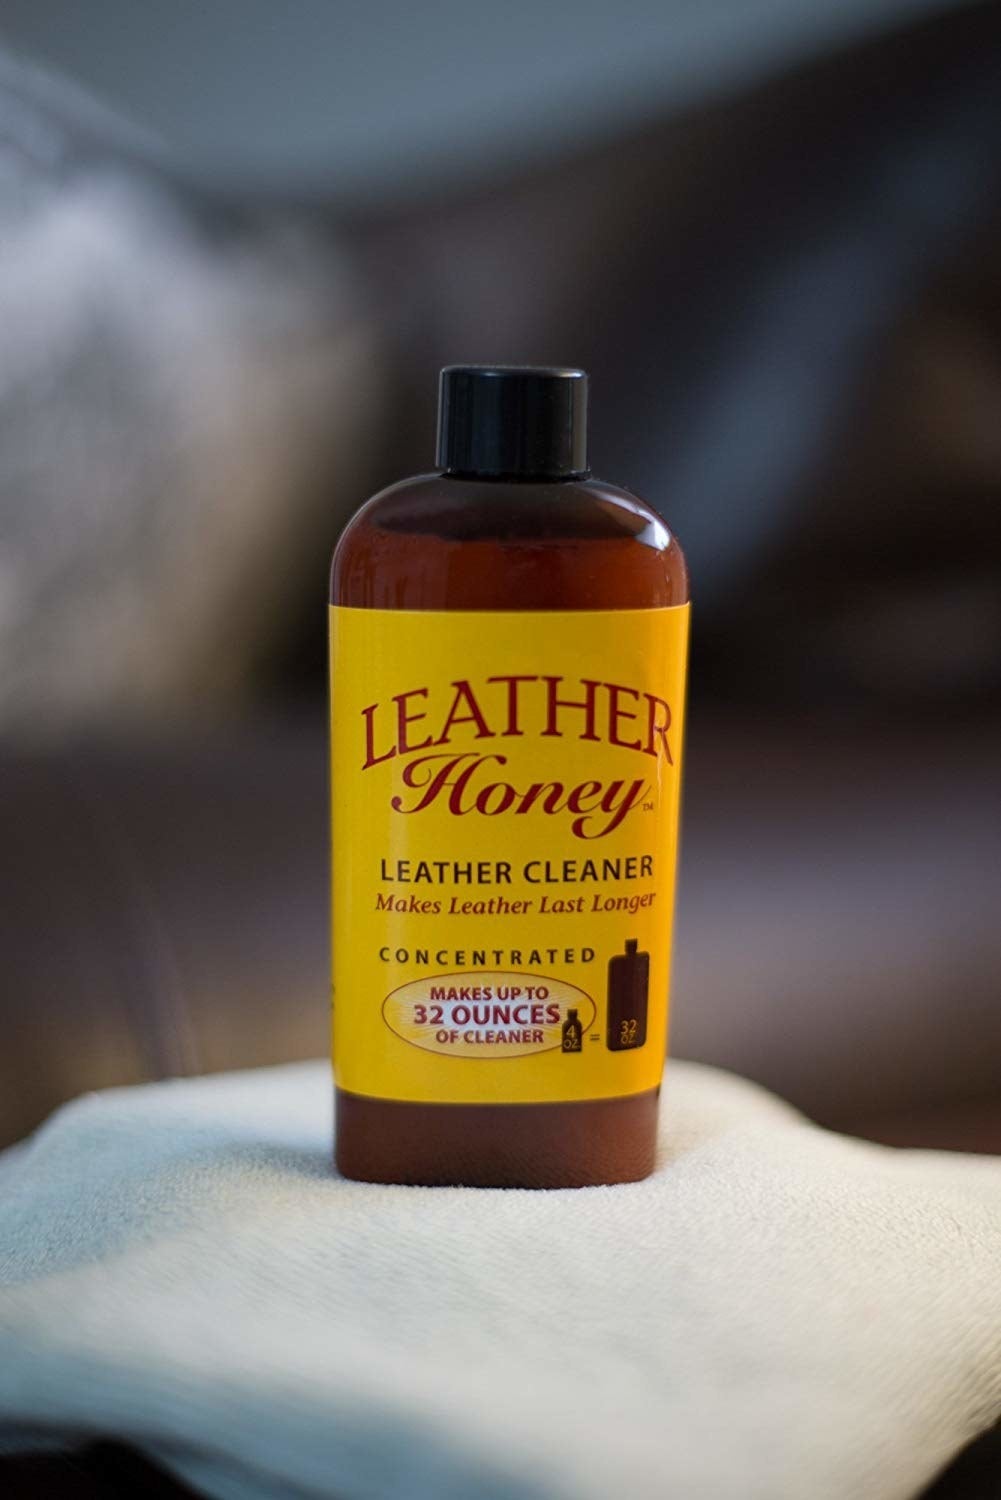 Amazing Leather Cleaner/Conditioner/Deodorizer | Powerful, Natural Enzyme Cleaner | USA Made | Great for Leather & Vinyl, Furniture, Boots, Purses, C